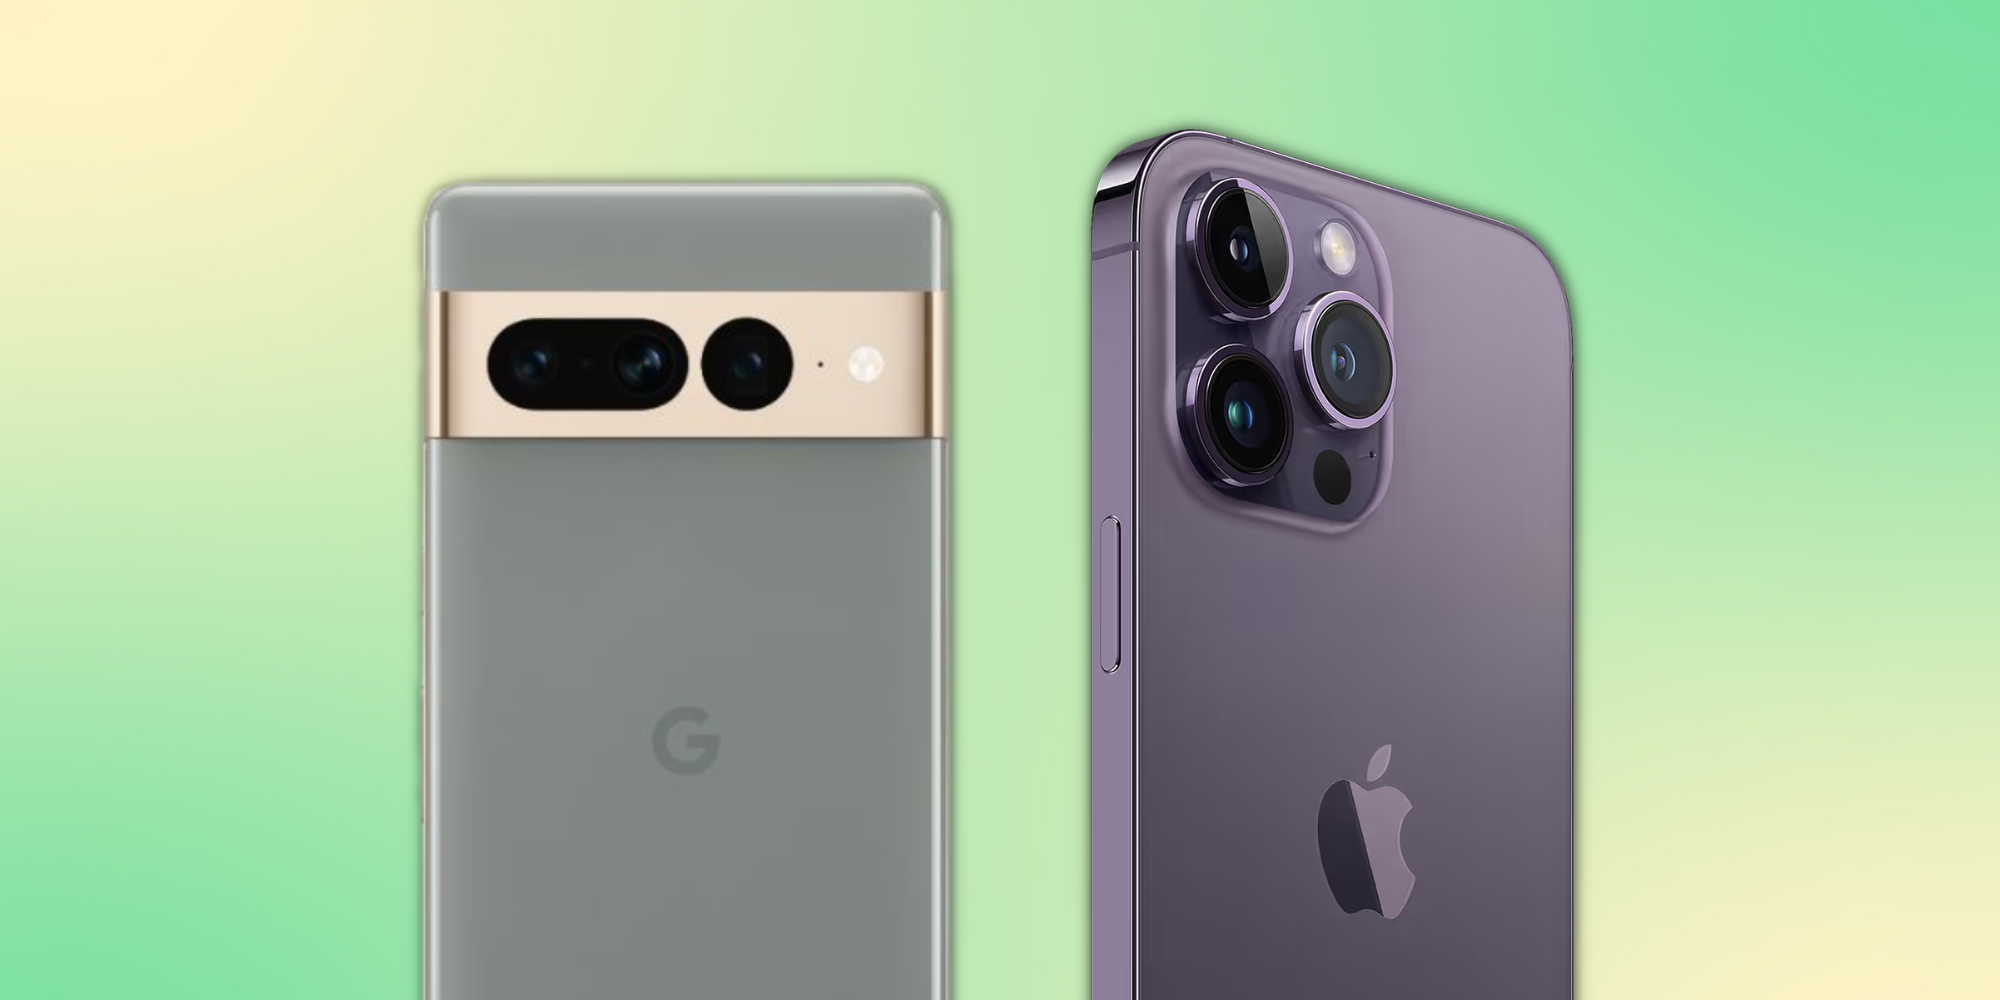 Google Pixel 7 Pro vs. iPhone 14 Pro Max: Which flagship phone wins?